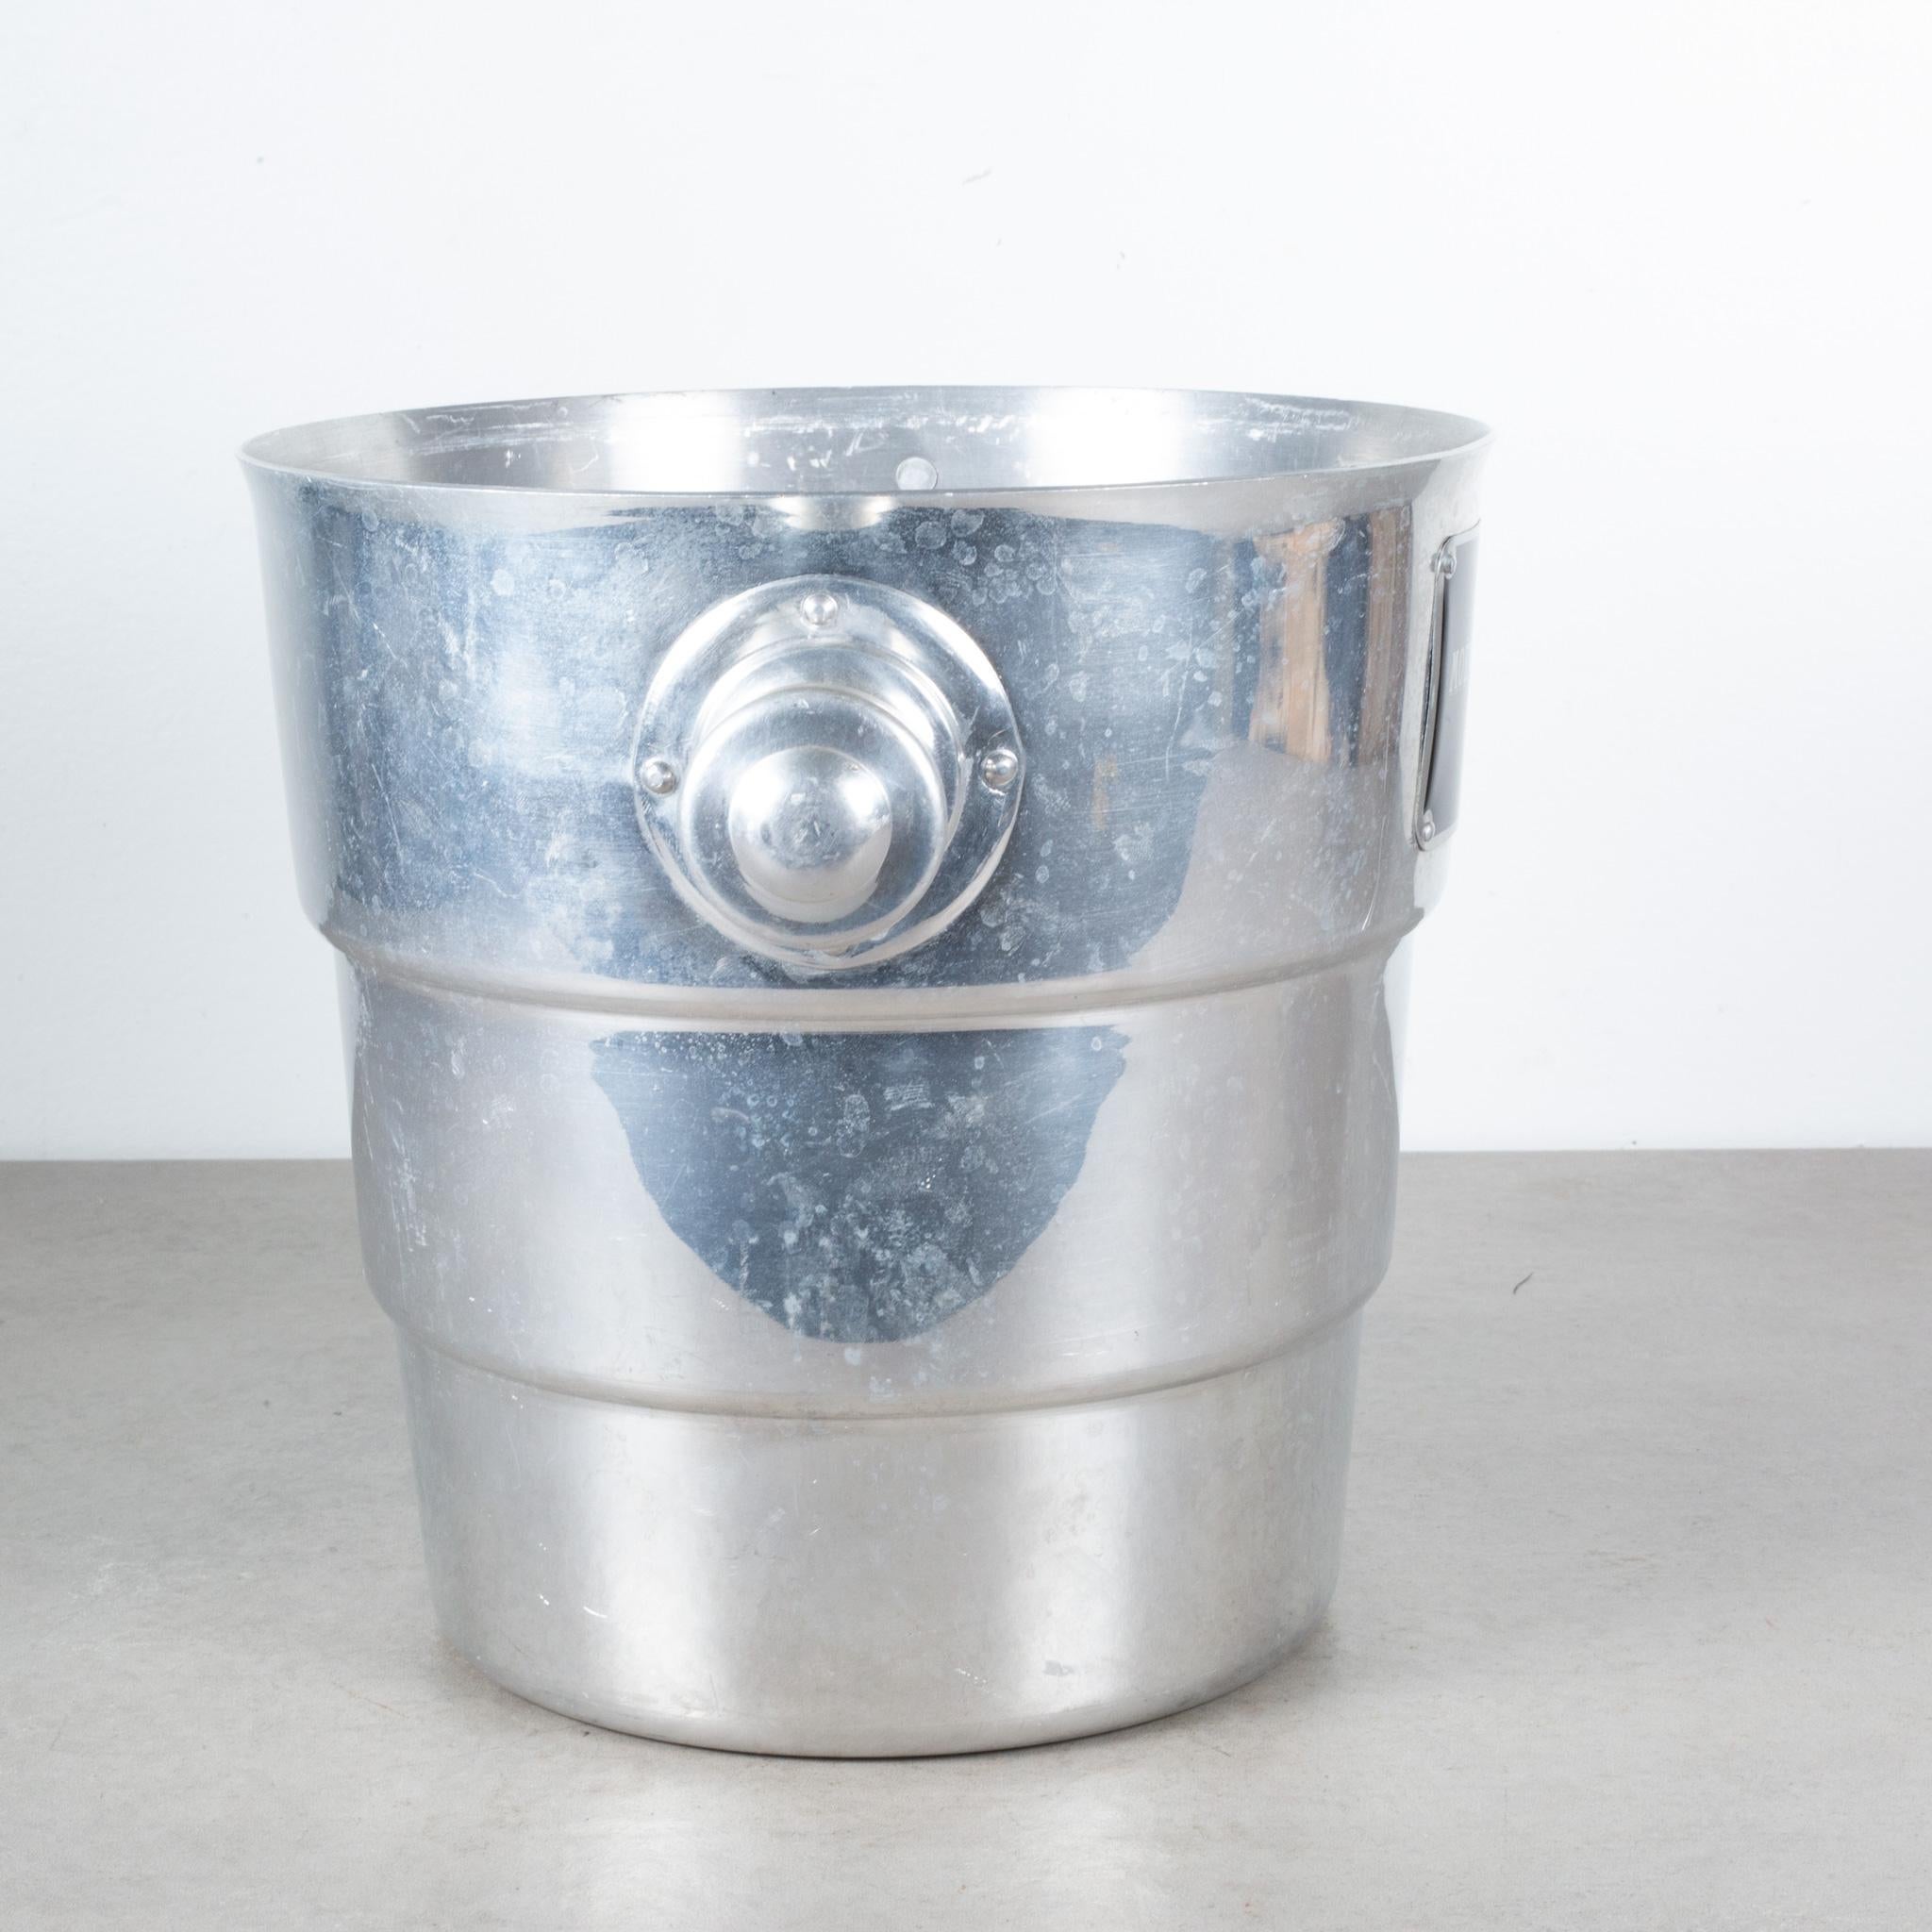 Art Deco Vintage Moet & Chandon Champagne Ice Bucket c.1940 (FREE SHIPPING) For Sale